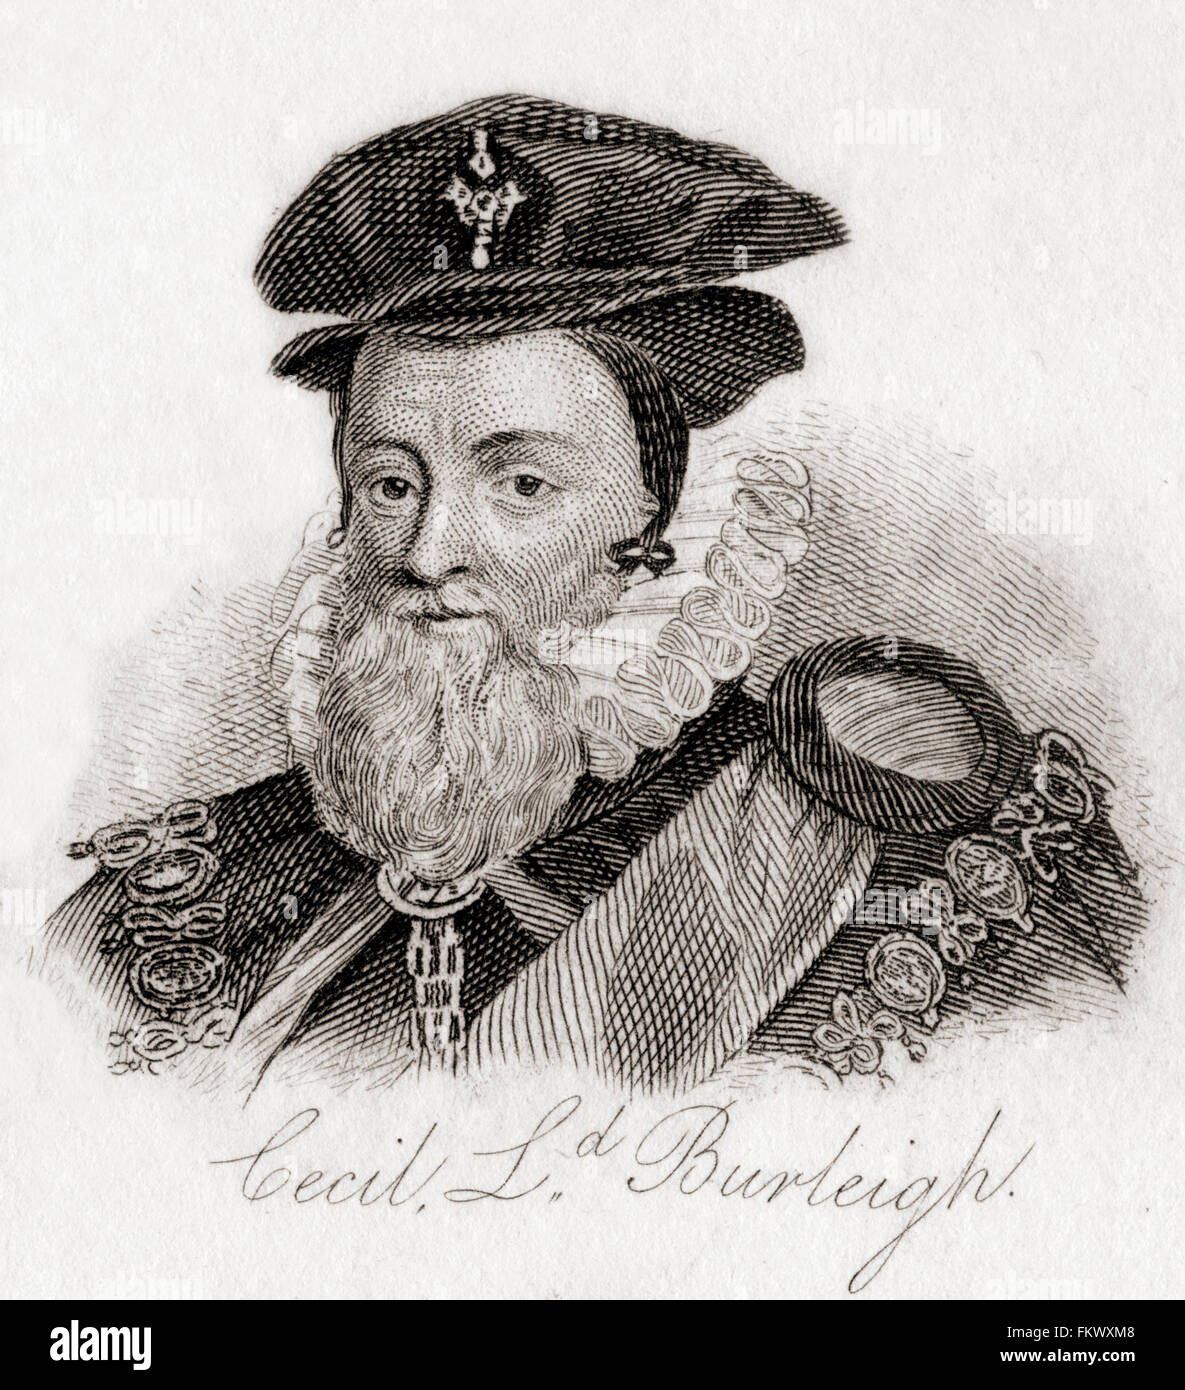 William Cecil, 1st Baron Burghley, sometimes spelt Burleigh, 1520 – 1598.  English statesman, chief advisor of Queen Elizabeth I for most of her reign, twice Secretary of State and Lord High Treasurer. Stock Photo